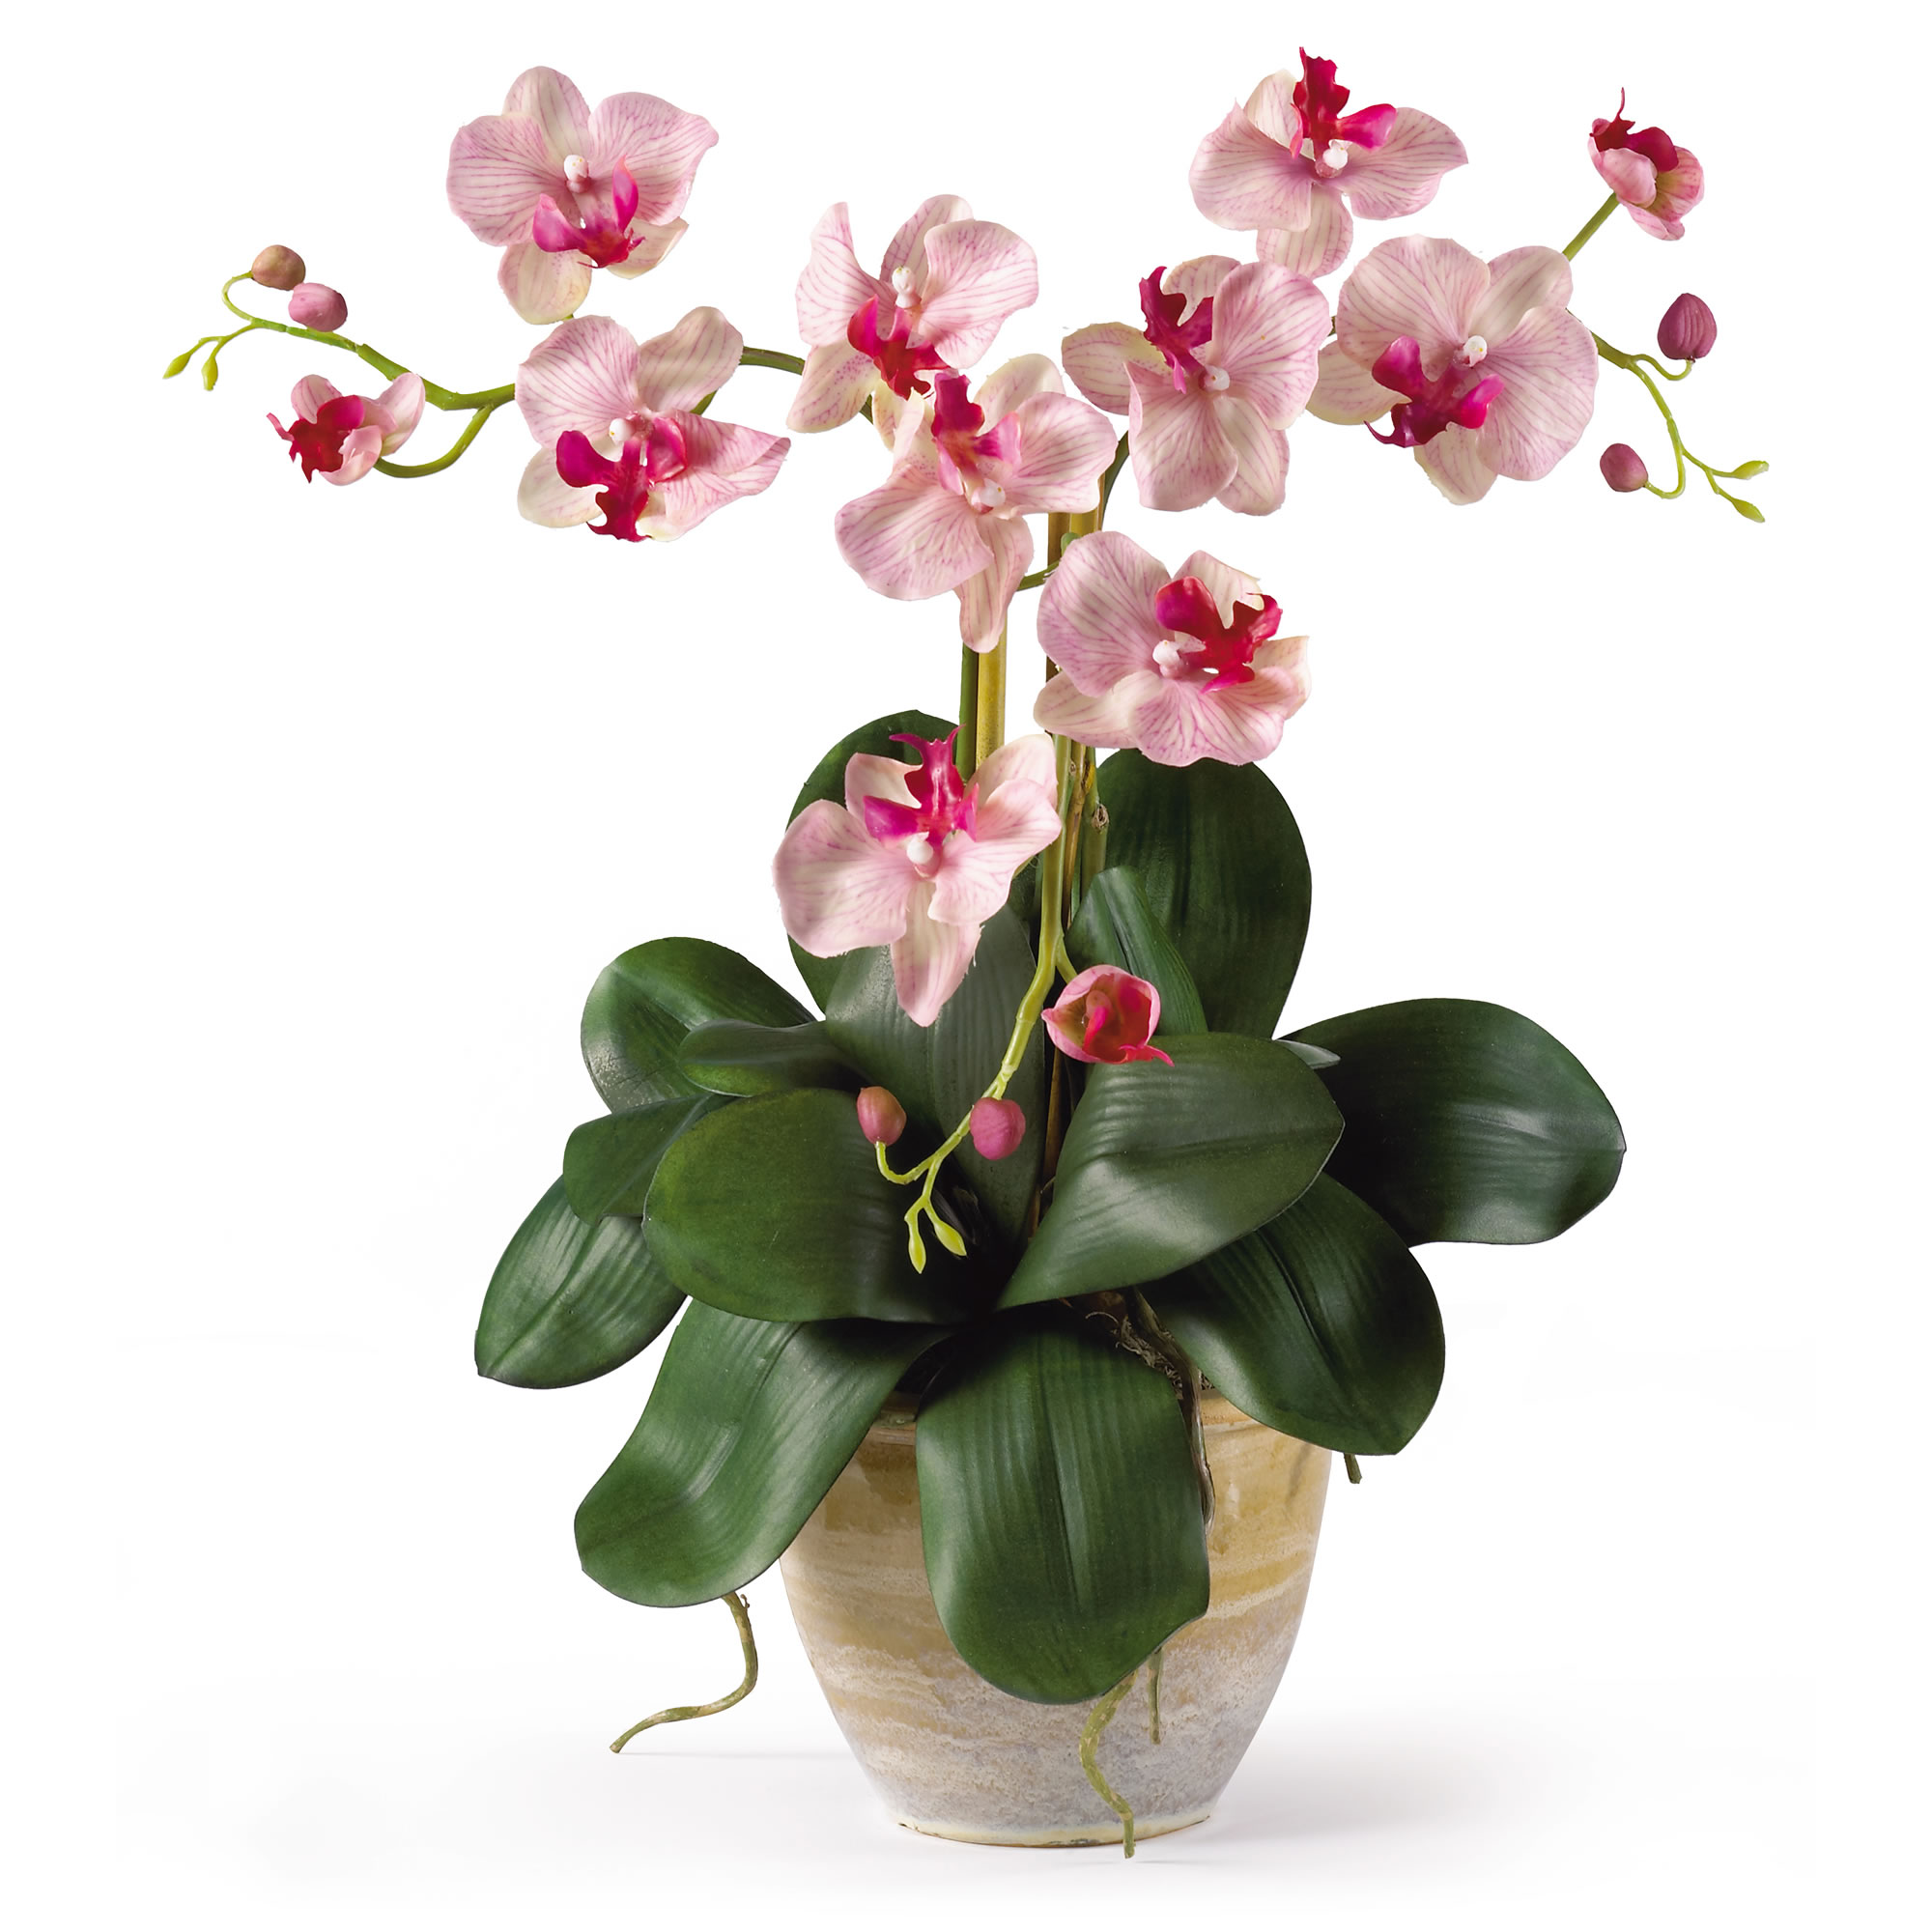 Phalenopsis orchids